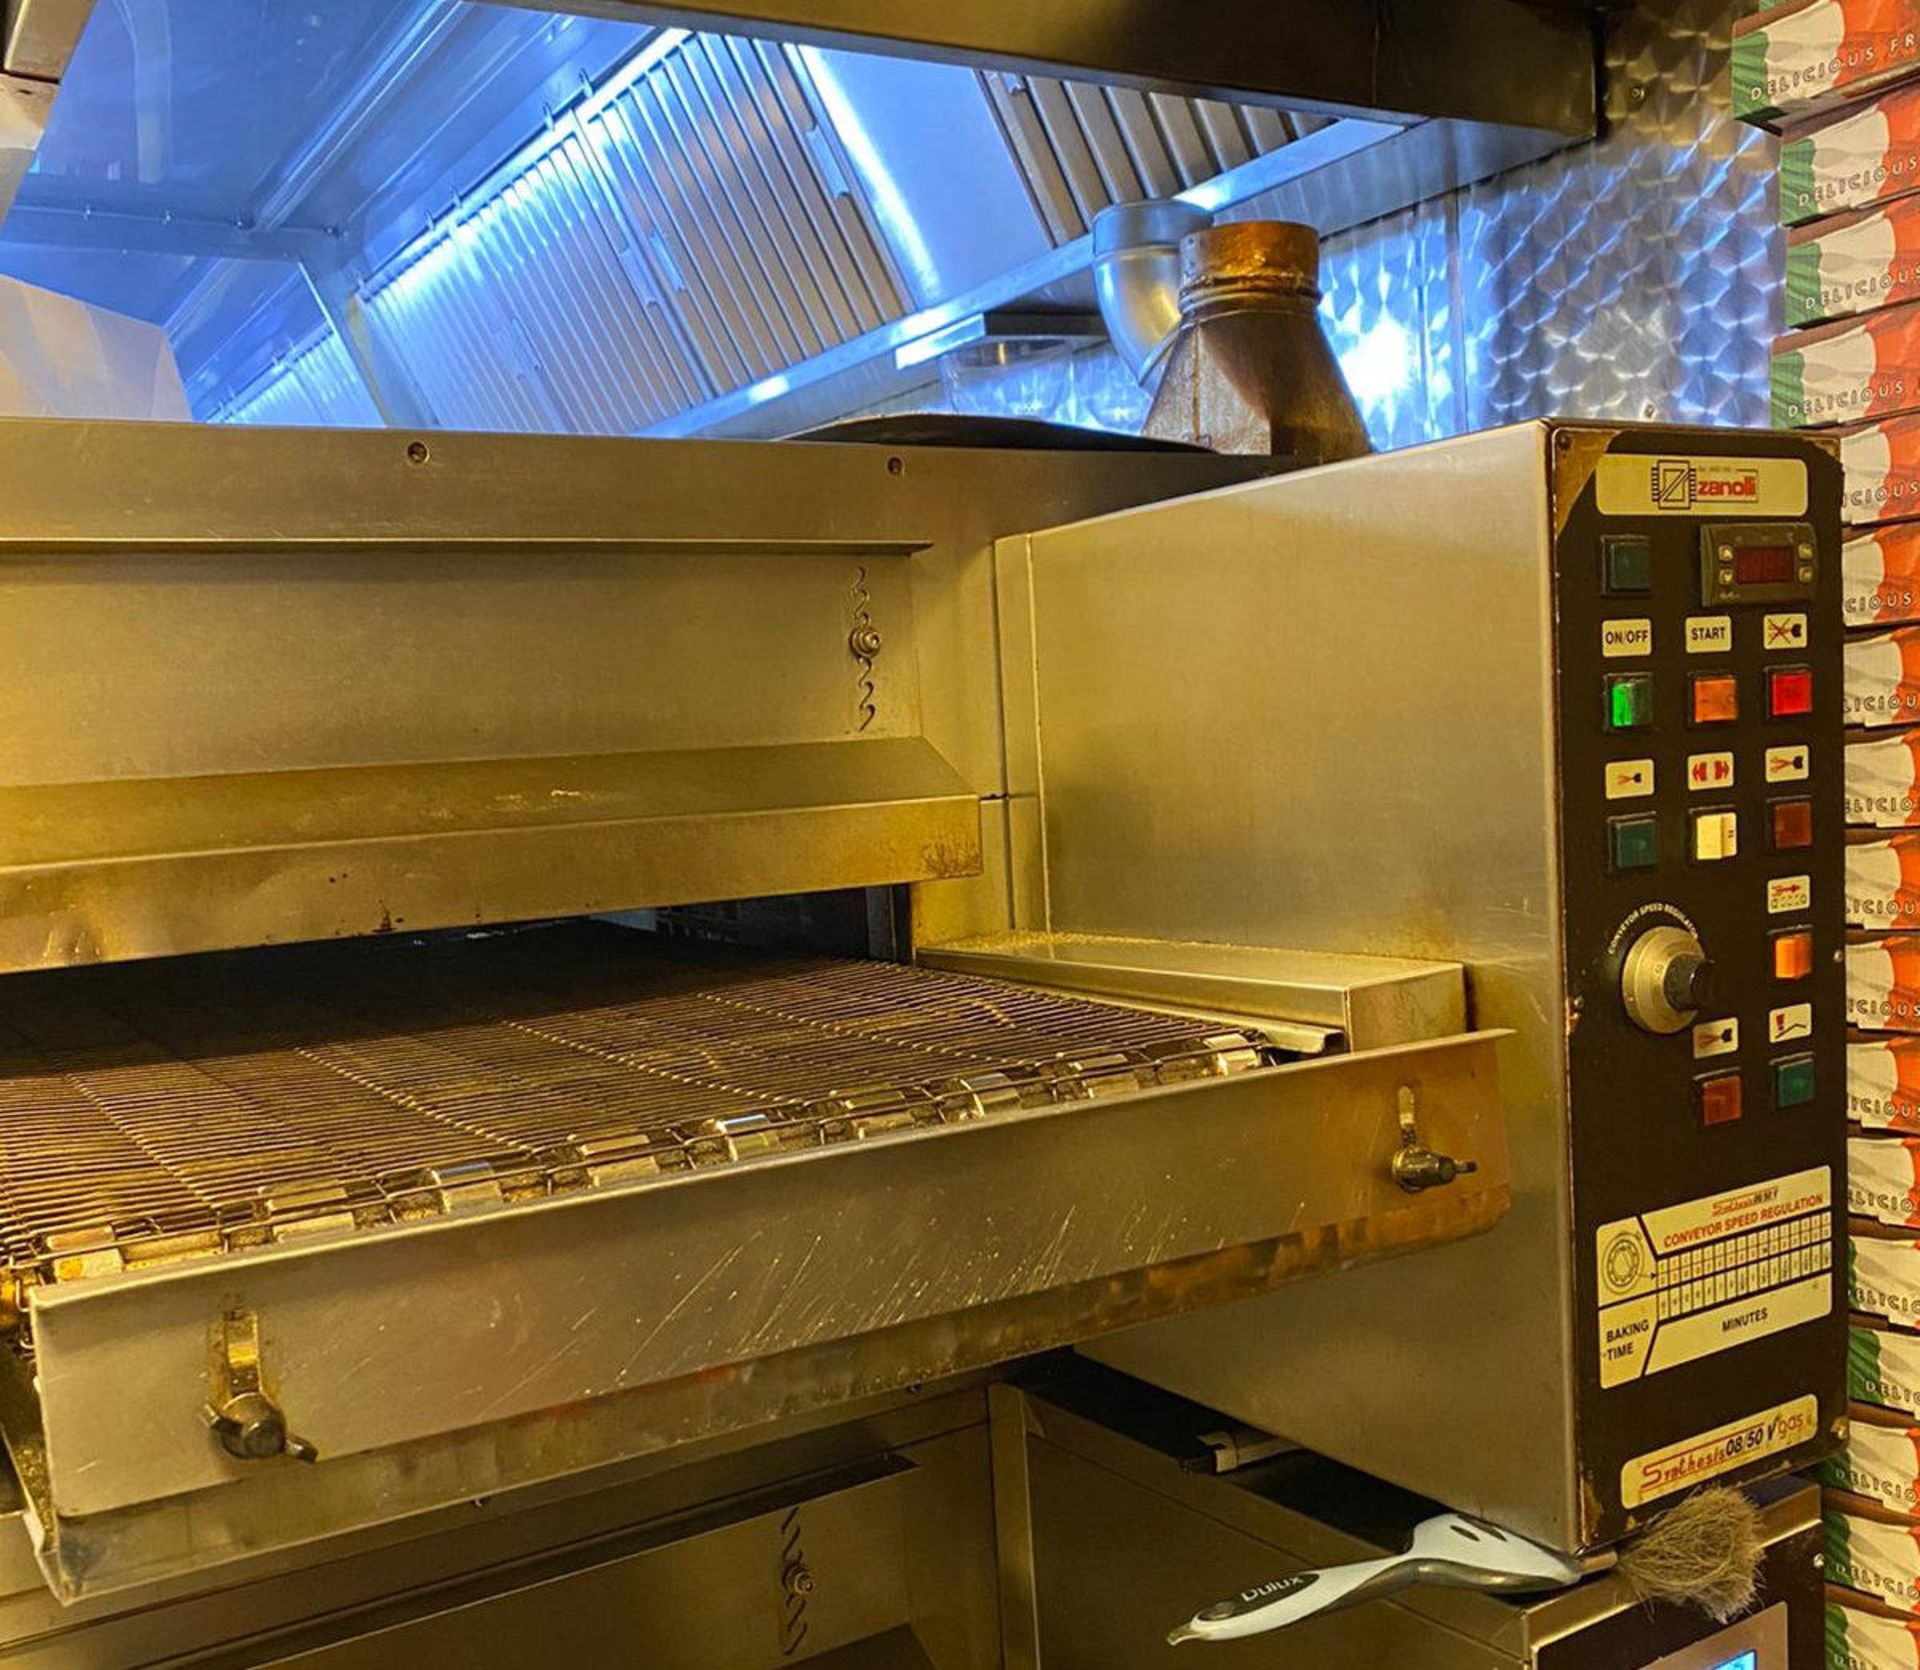 1 x Zanolli Synthesis 08/50 V Conveyor Pizza Oven - Requires repair - CL633 - Location: - Image 5 of 7